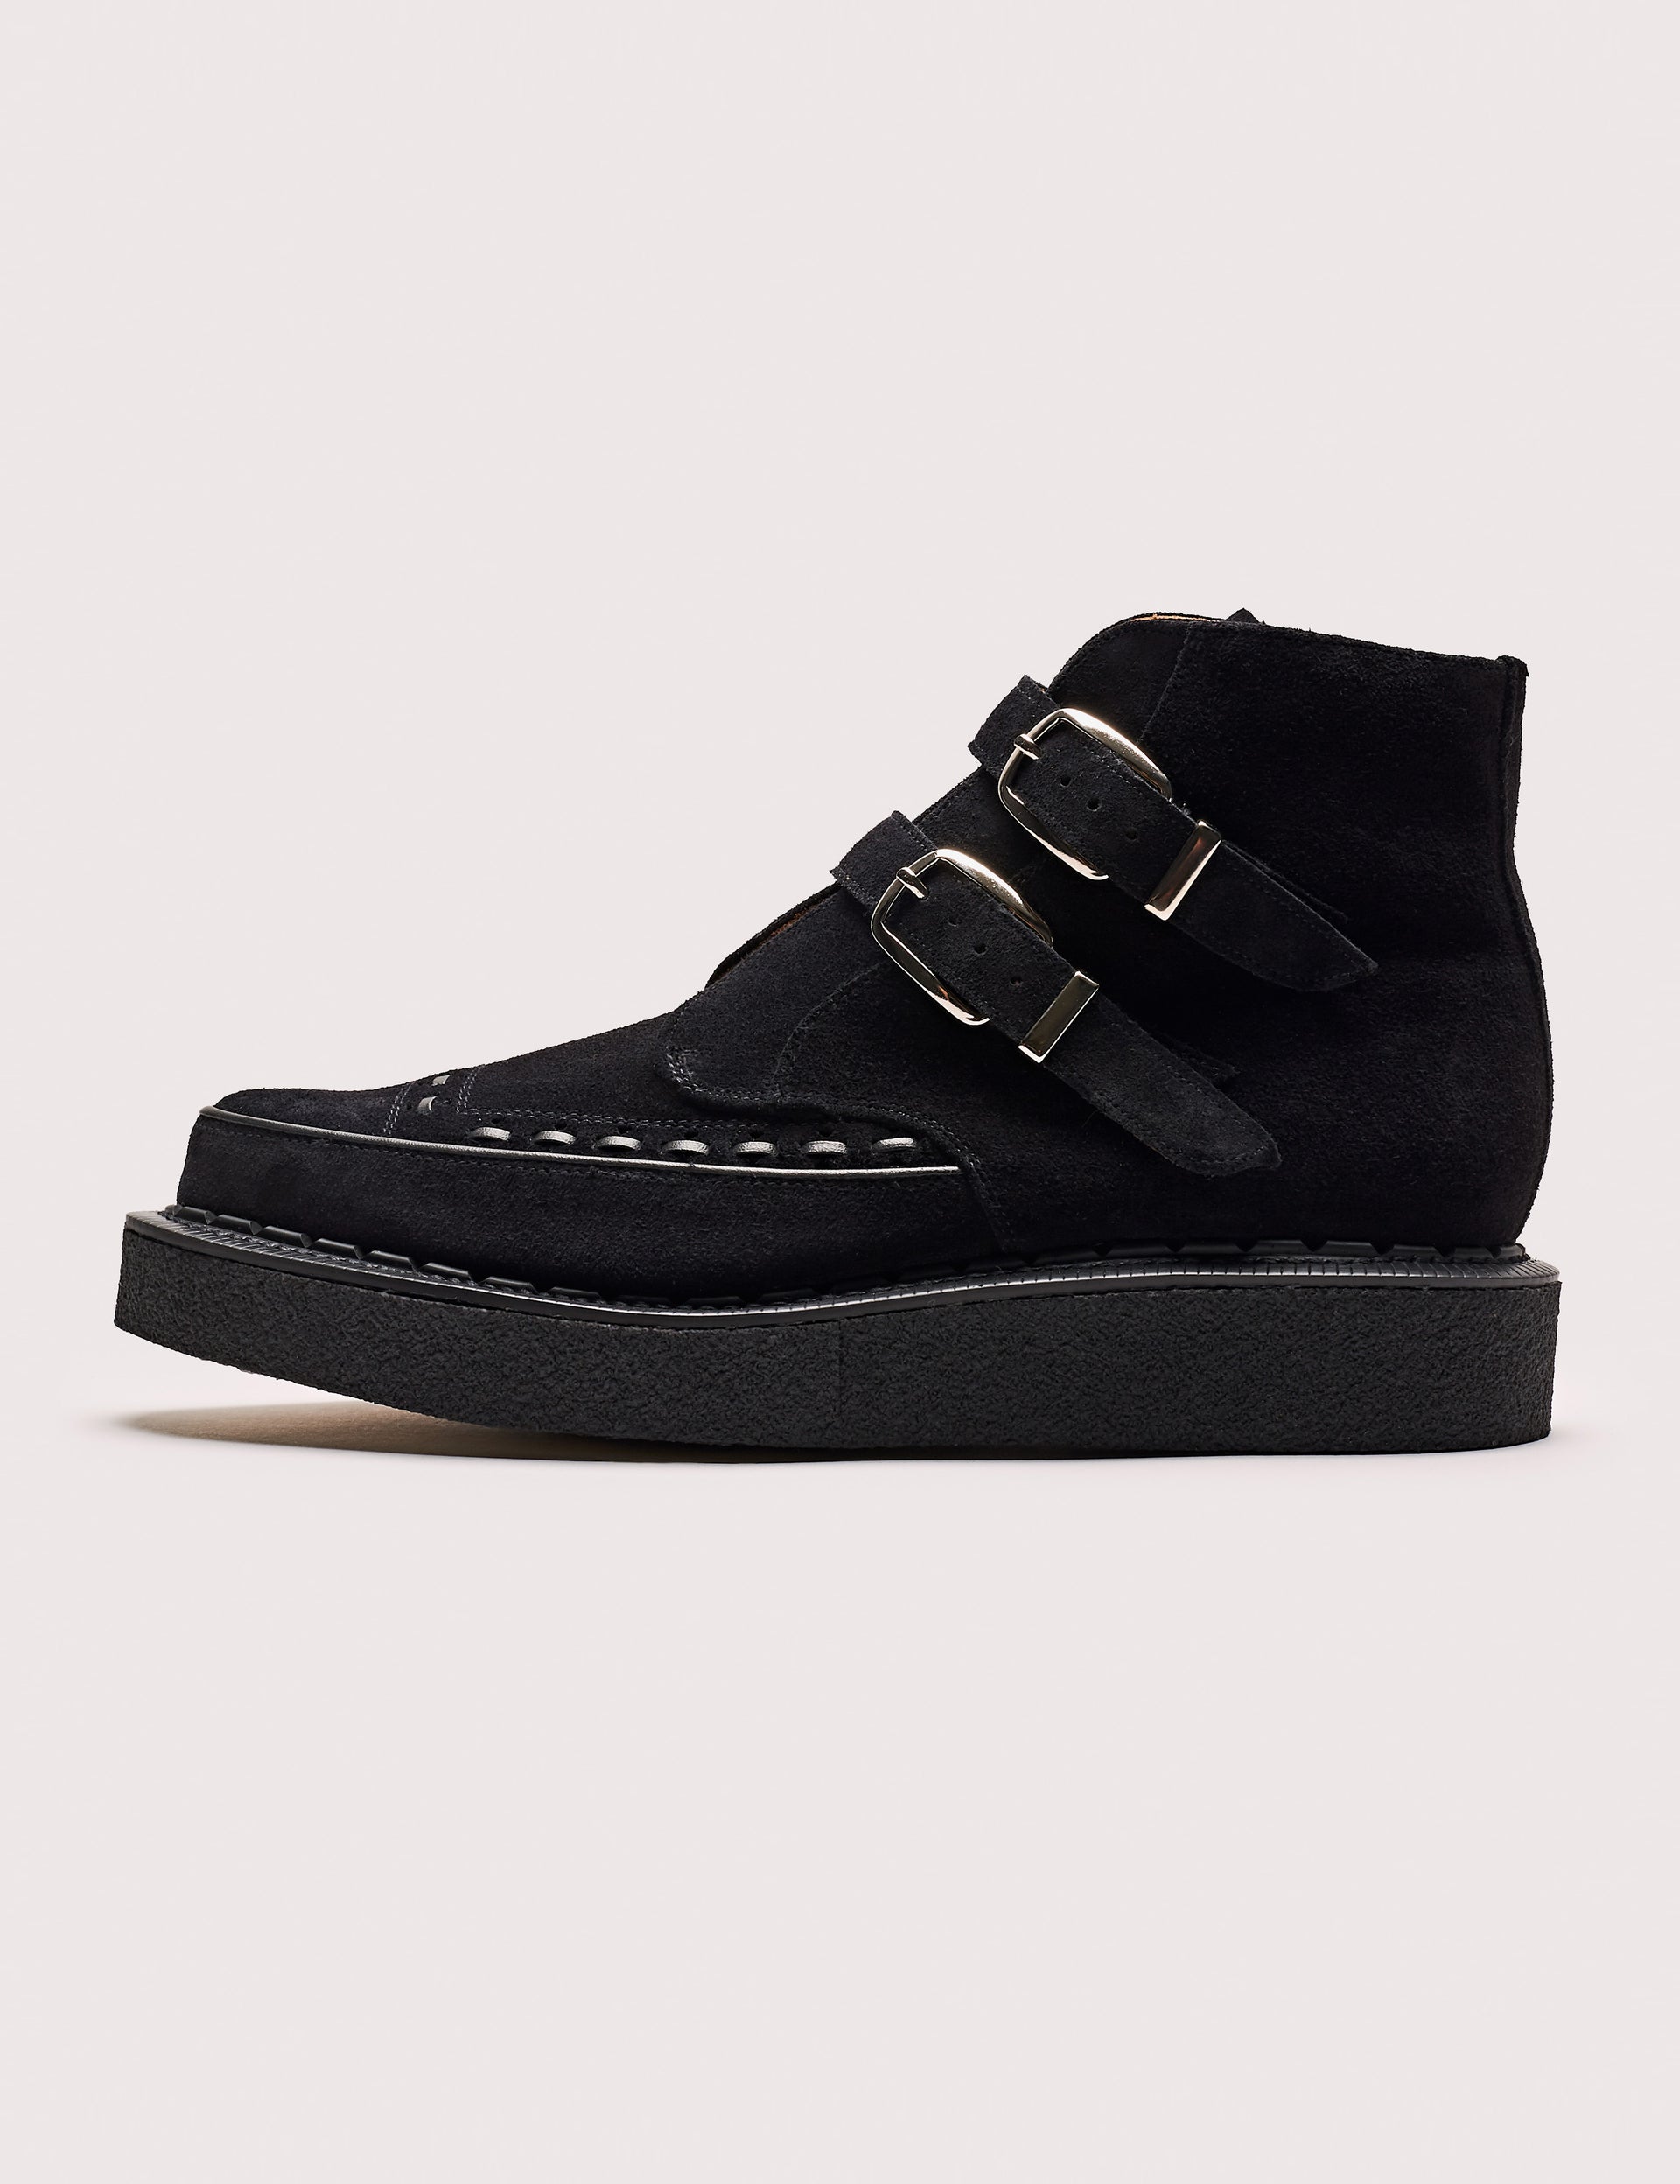 Diano Monk Boot Black Suede – George Cox